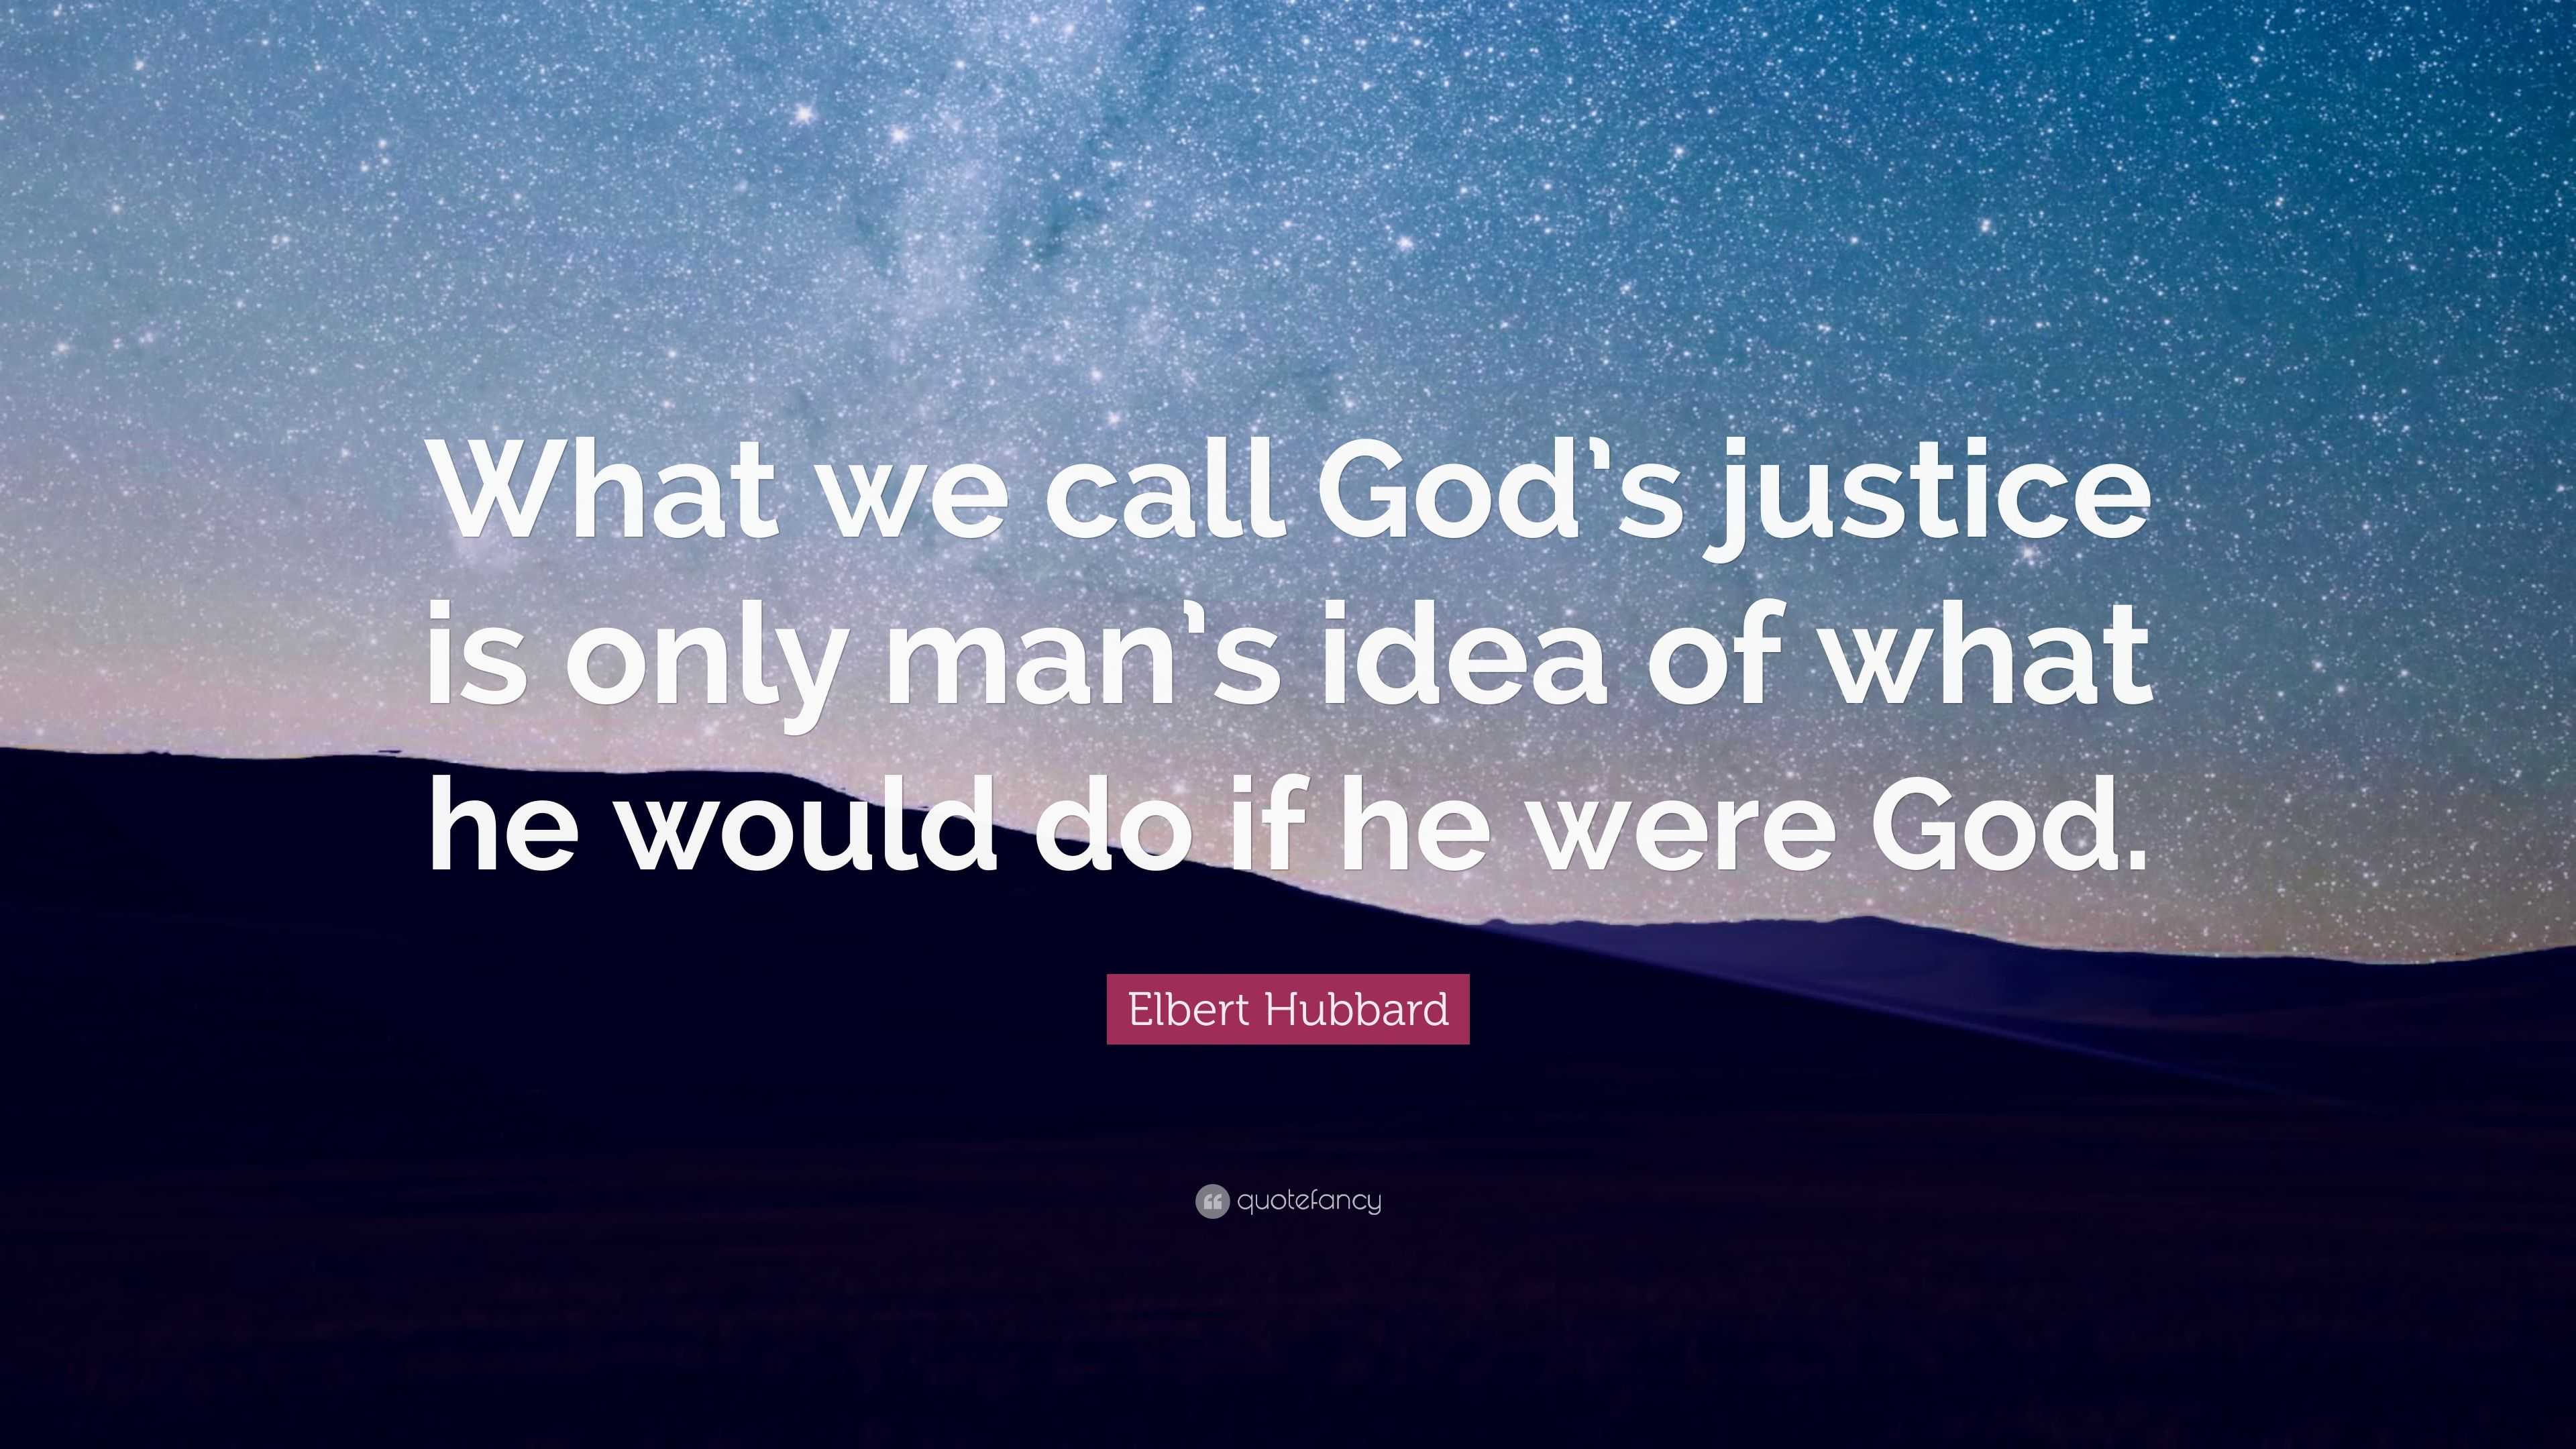 Elbert Hubbard Quote: “What we call God’s justice is only man’s idea of ...